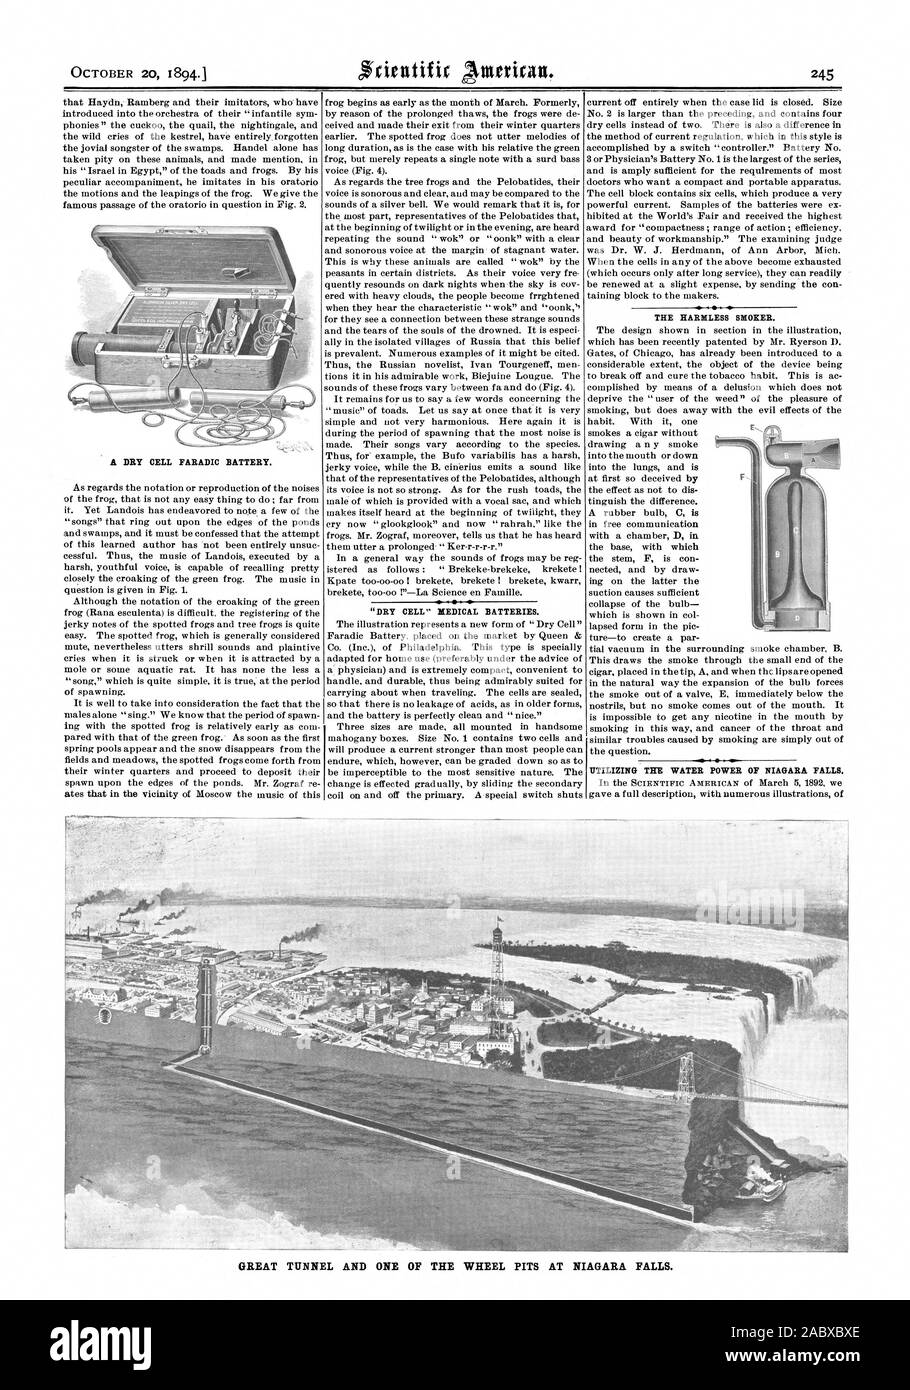 OCTOBER 20 1894.1 'DRY CELL' MEDICAL BATTERIES. THE HARMLESS SMOKER. UTILIZING THE WATER POWER OF NIAGARA FALLS. GREAT TUNNEL AND ONE OF THE WHEEL PITS AT NIAGARA FALLS., scientific american, 1894-10-20 Stock Photo